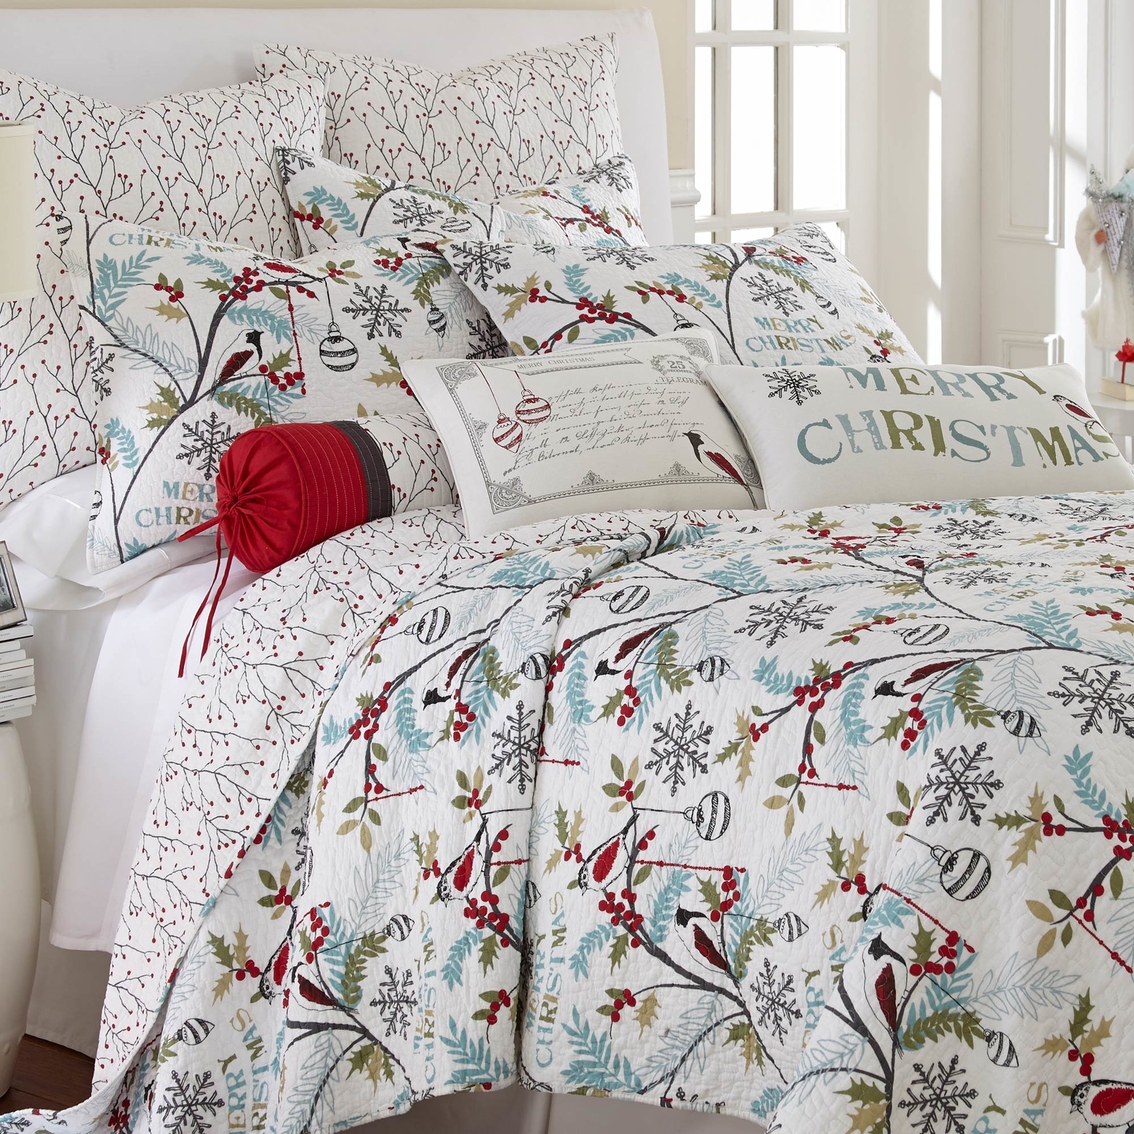 Levtex Home Holly Full/Queen Quilt Set - Image 2 of 4